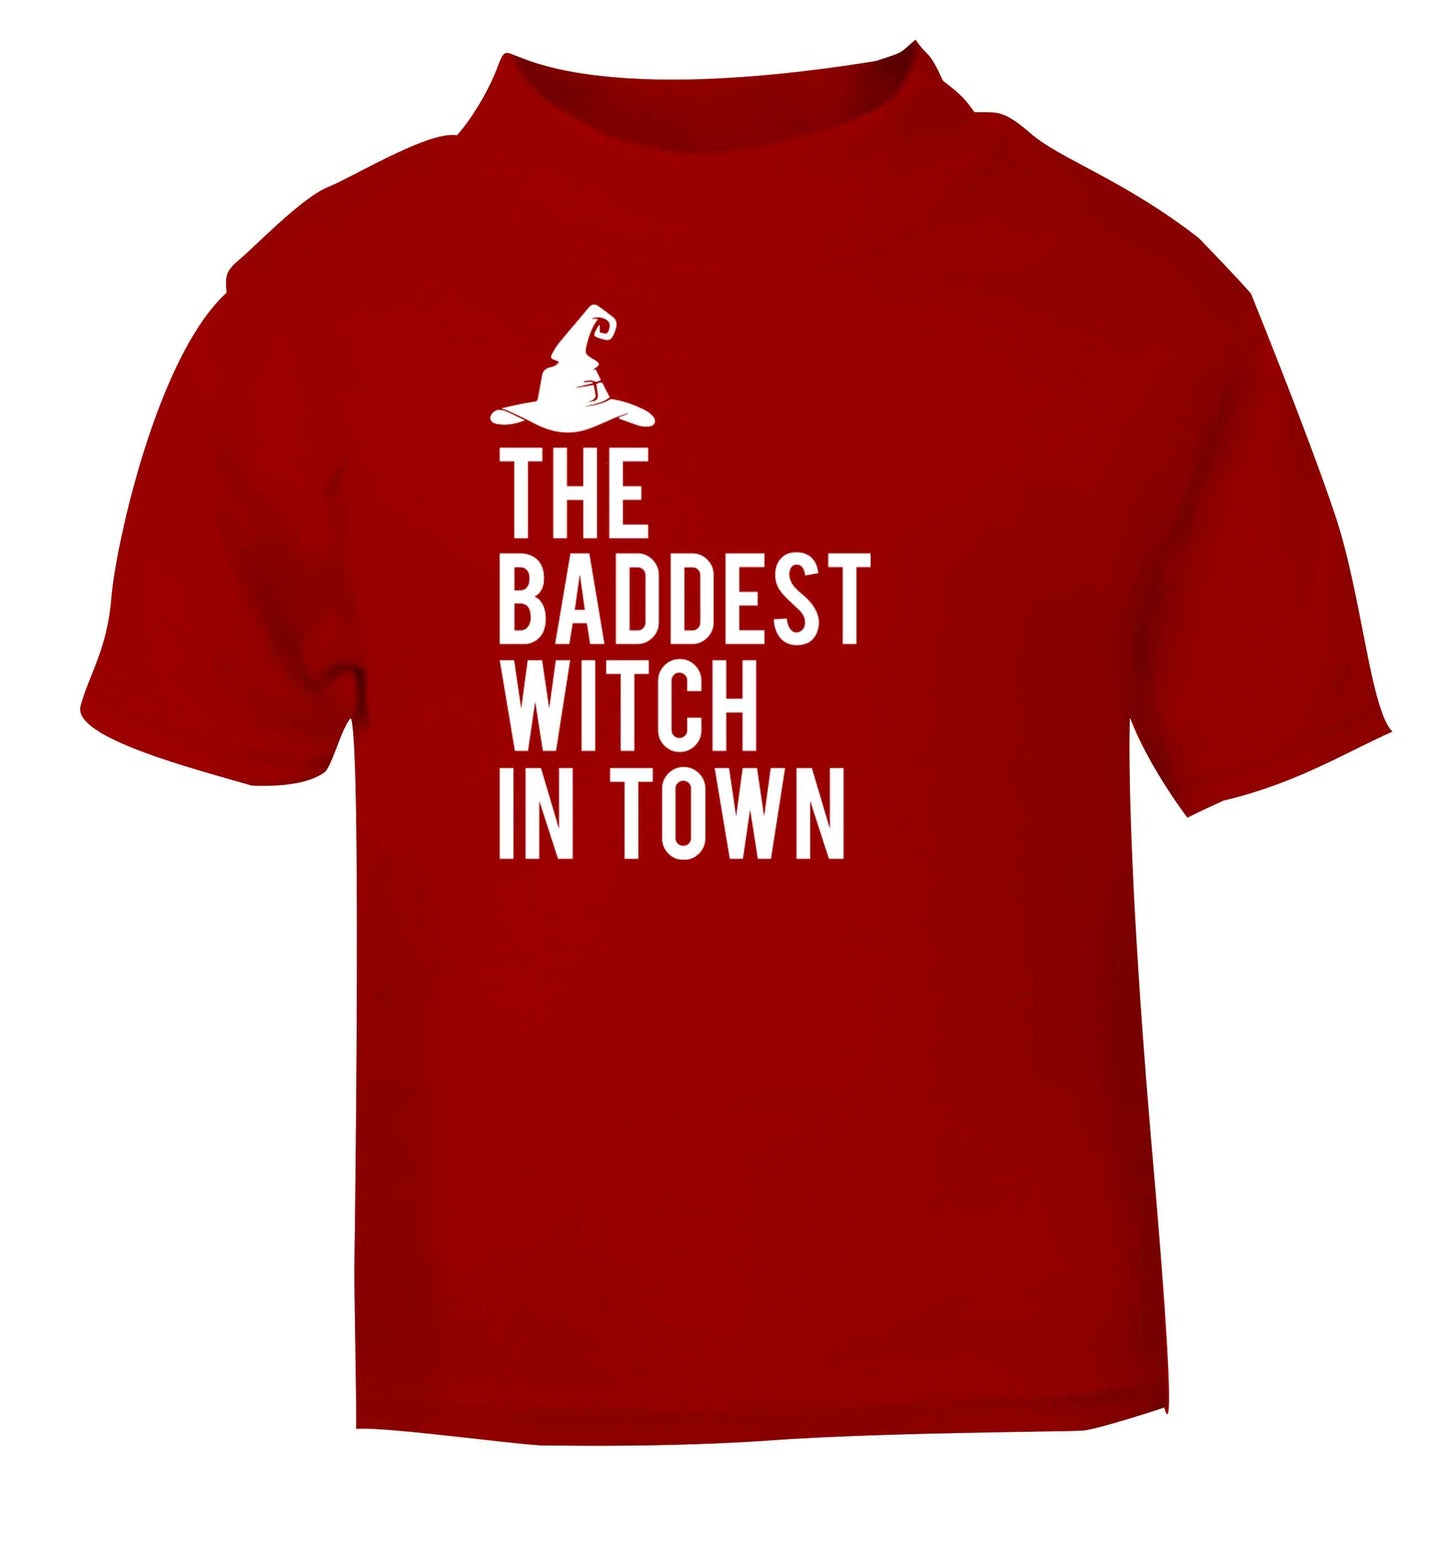 Badest witch in town red baby toddler Tshirt 2 Years